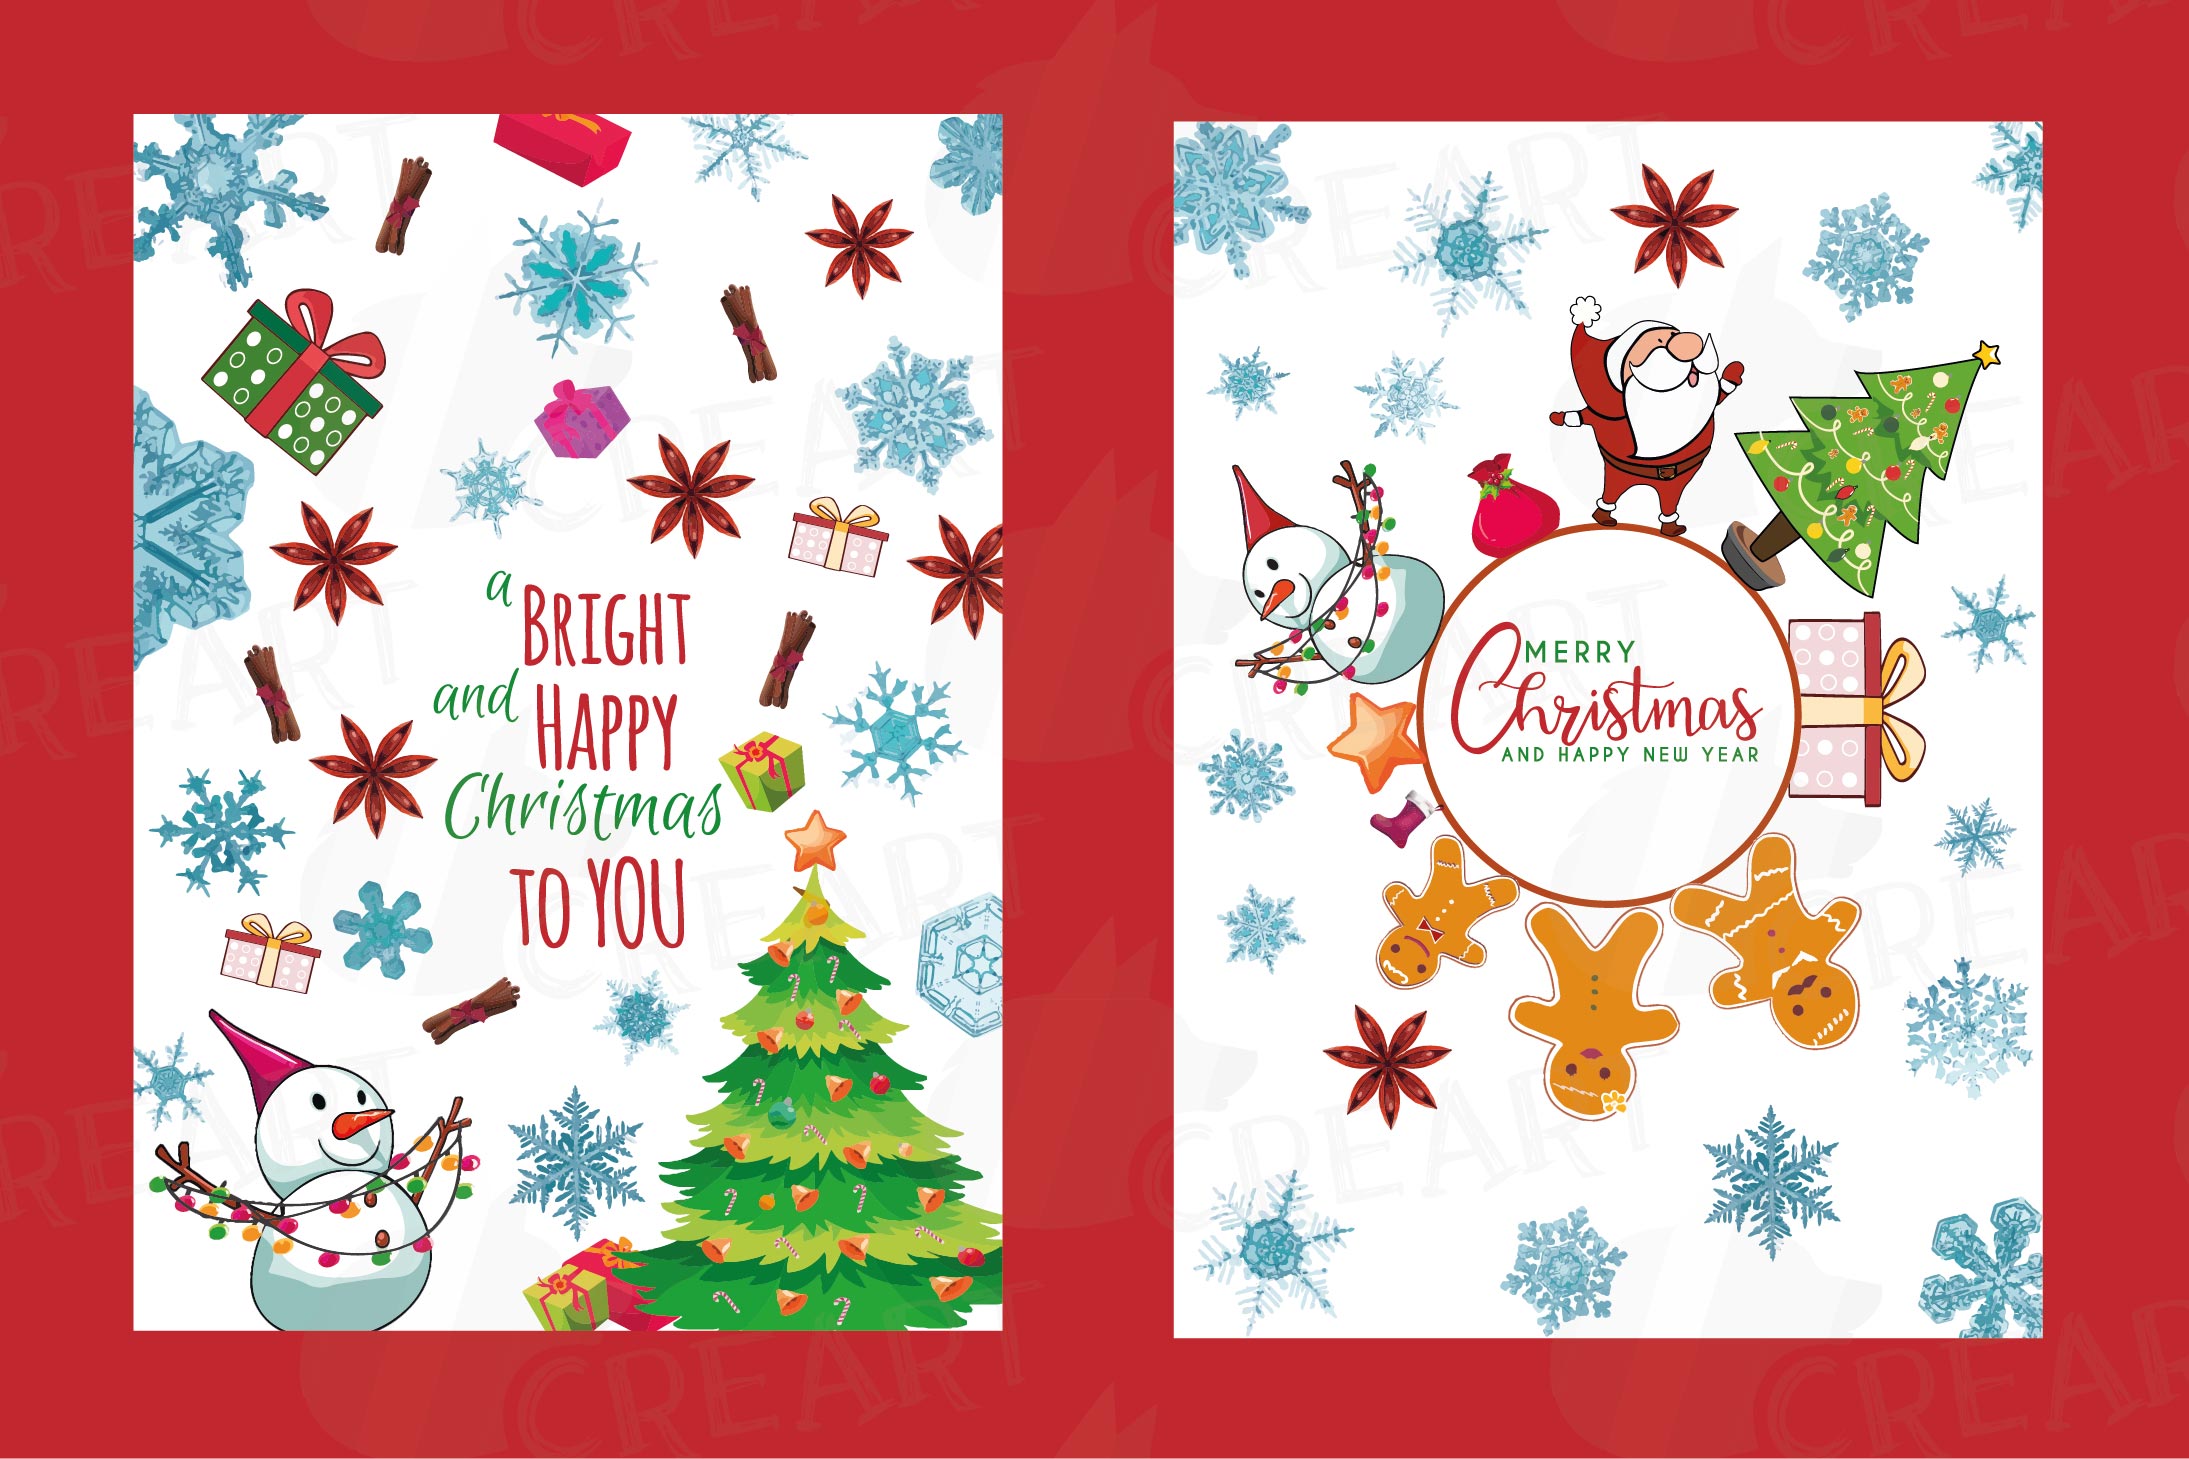 70+ Inspirational Christmas Greetings Messages